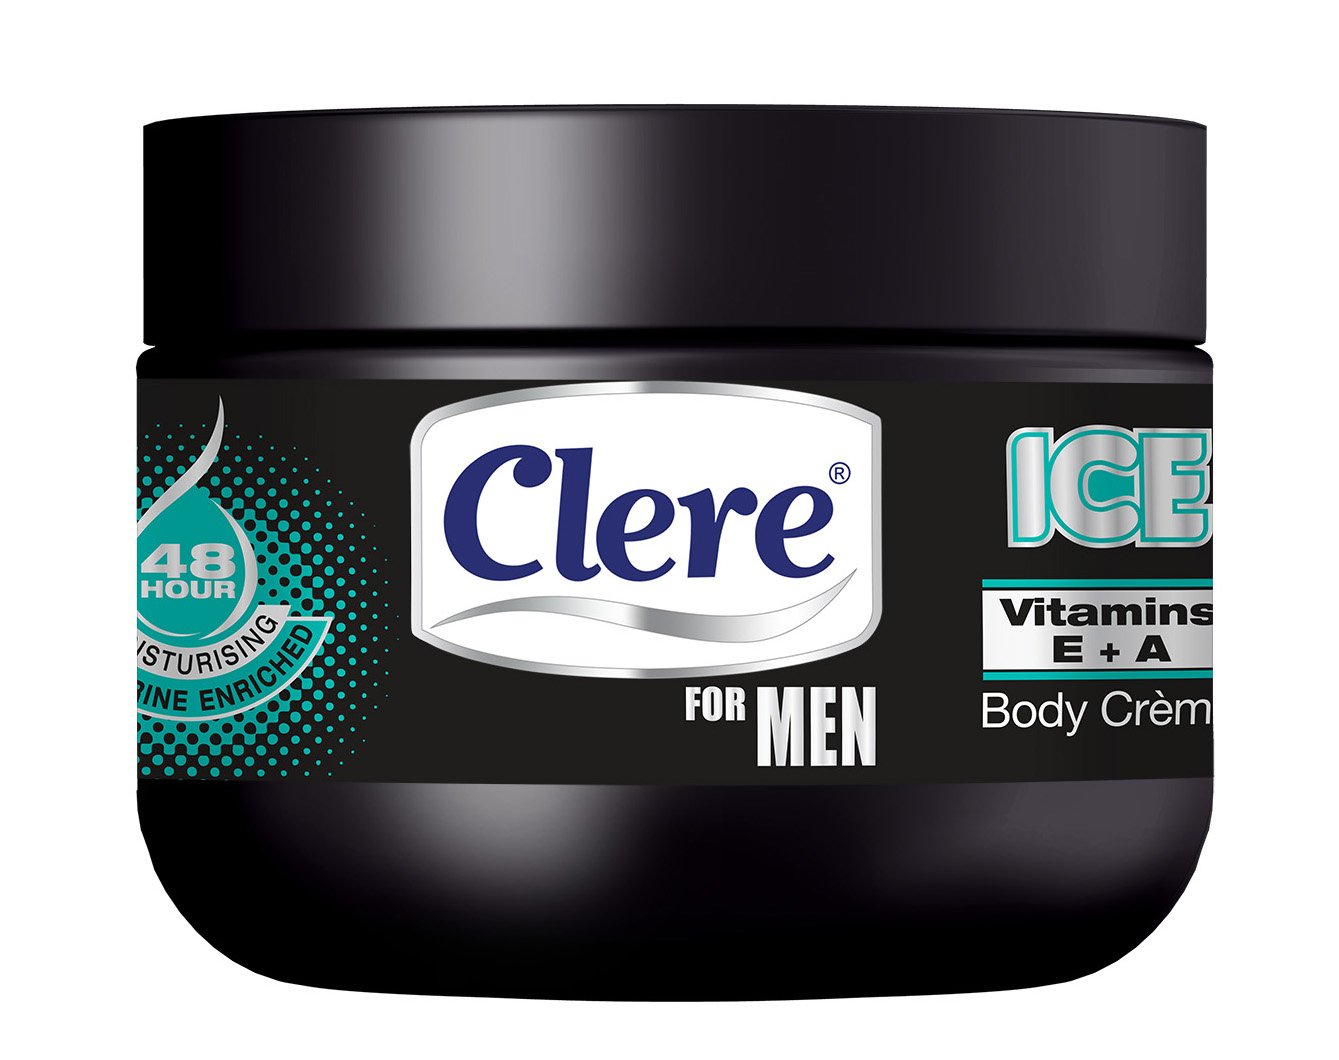 Clere For Men Body Crème - ICE - 250ml